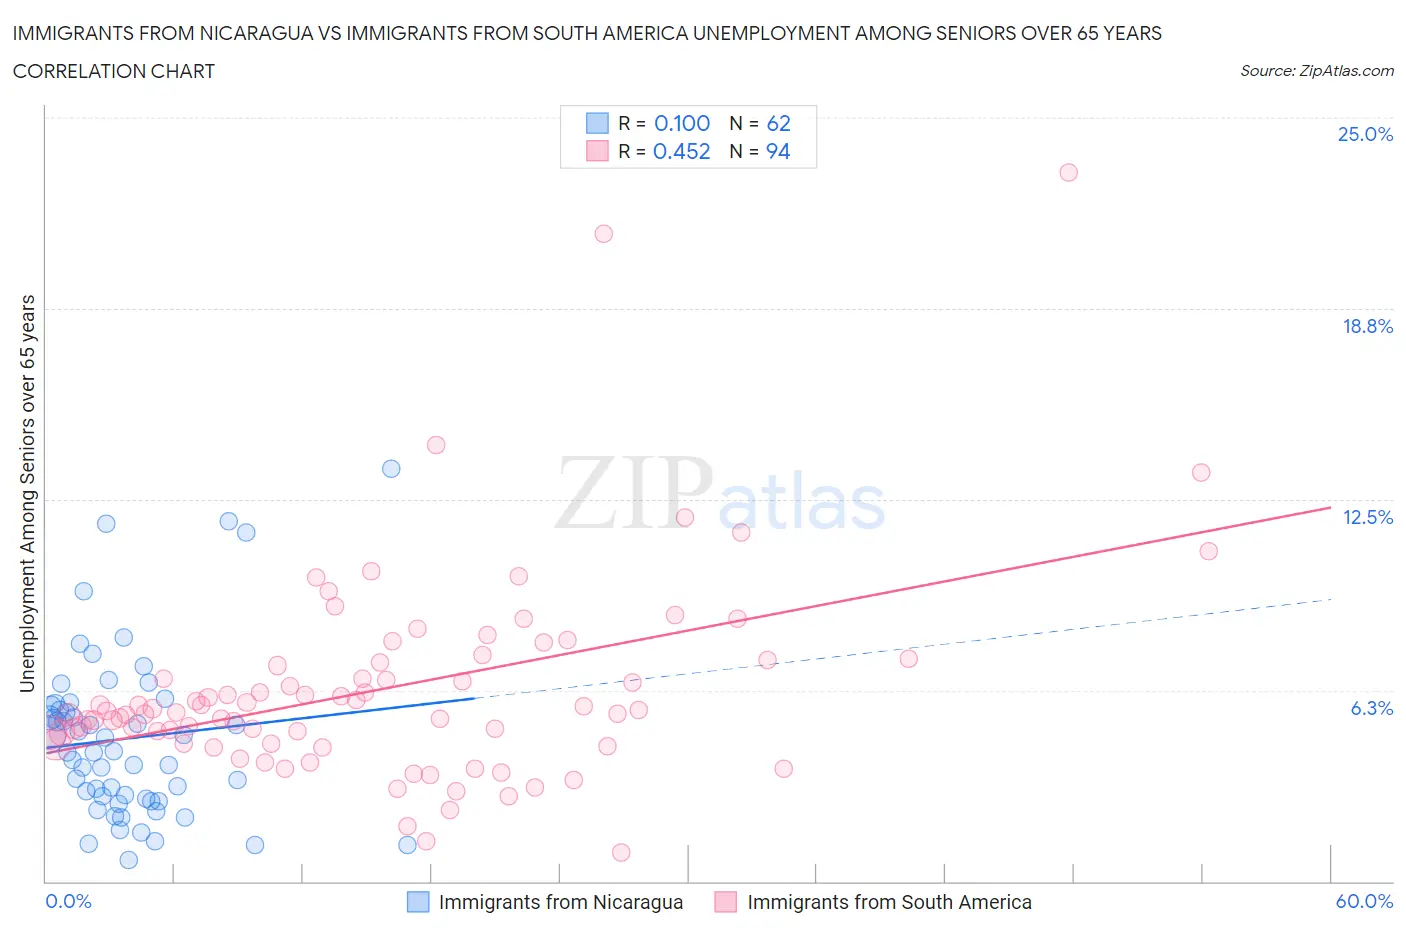 Immigrants from Nicaragua vs Immigrants from South America Unemployment Among Seniors over 65 years